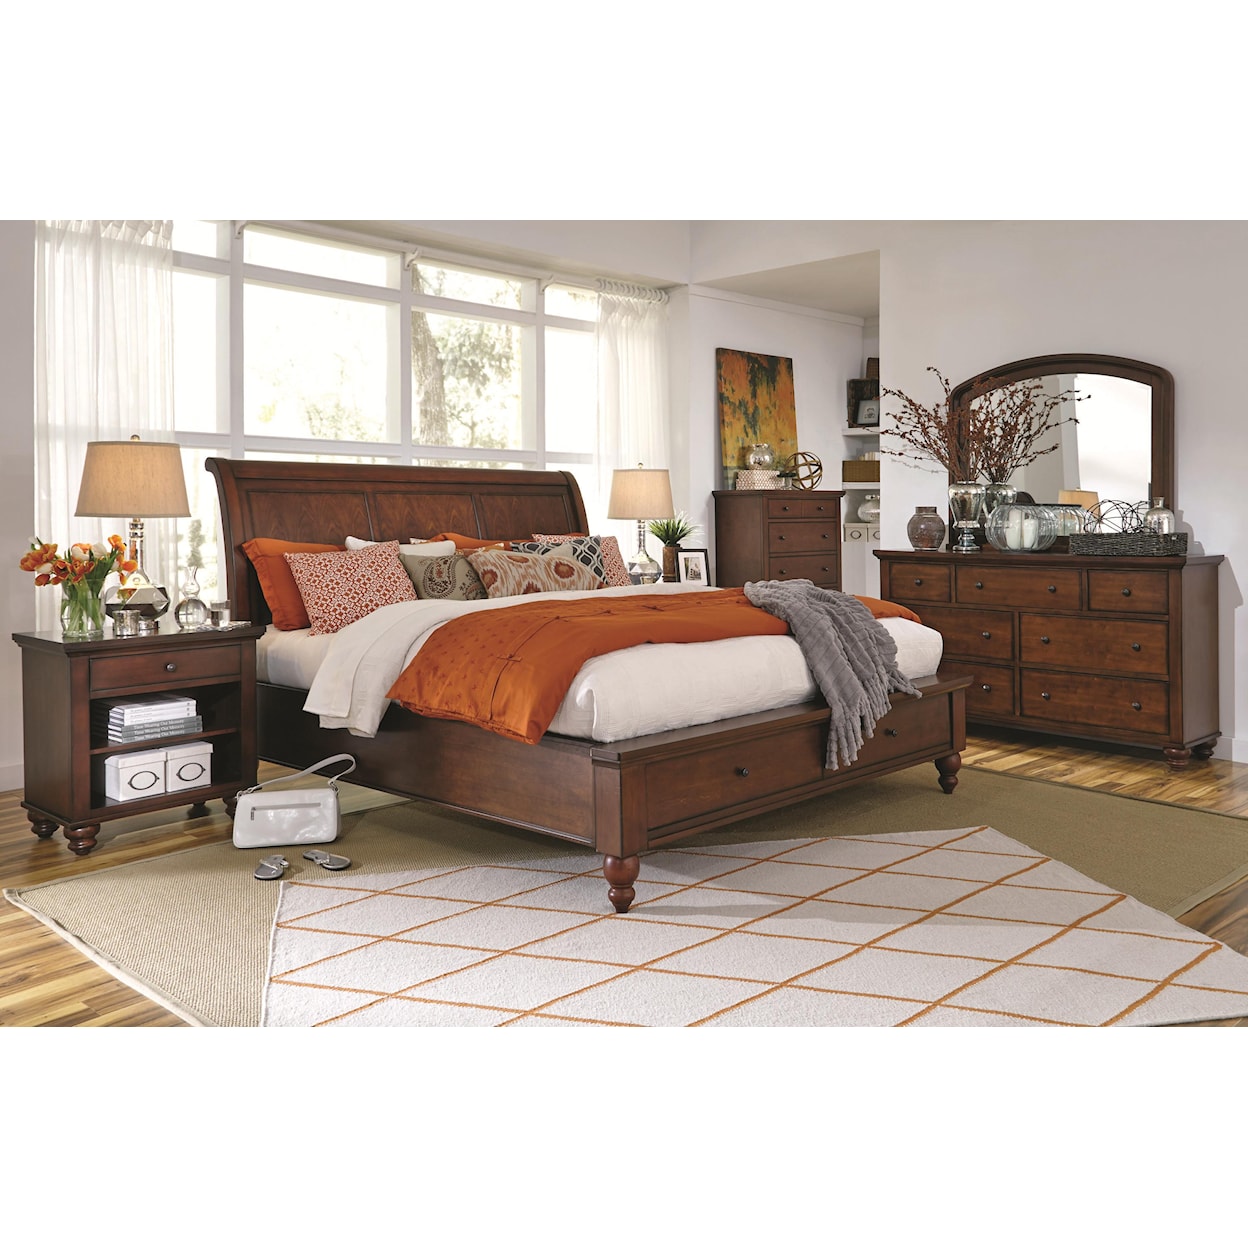 Aspenhome Clinton Clinton King Sleigh Bed with Storage